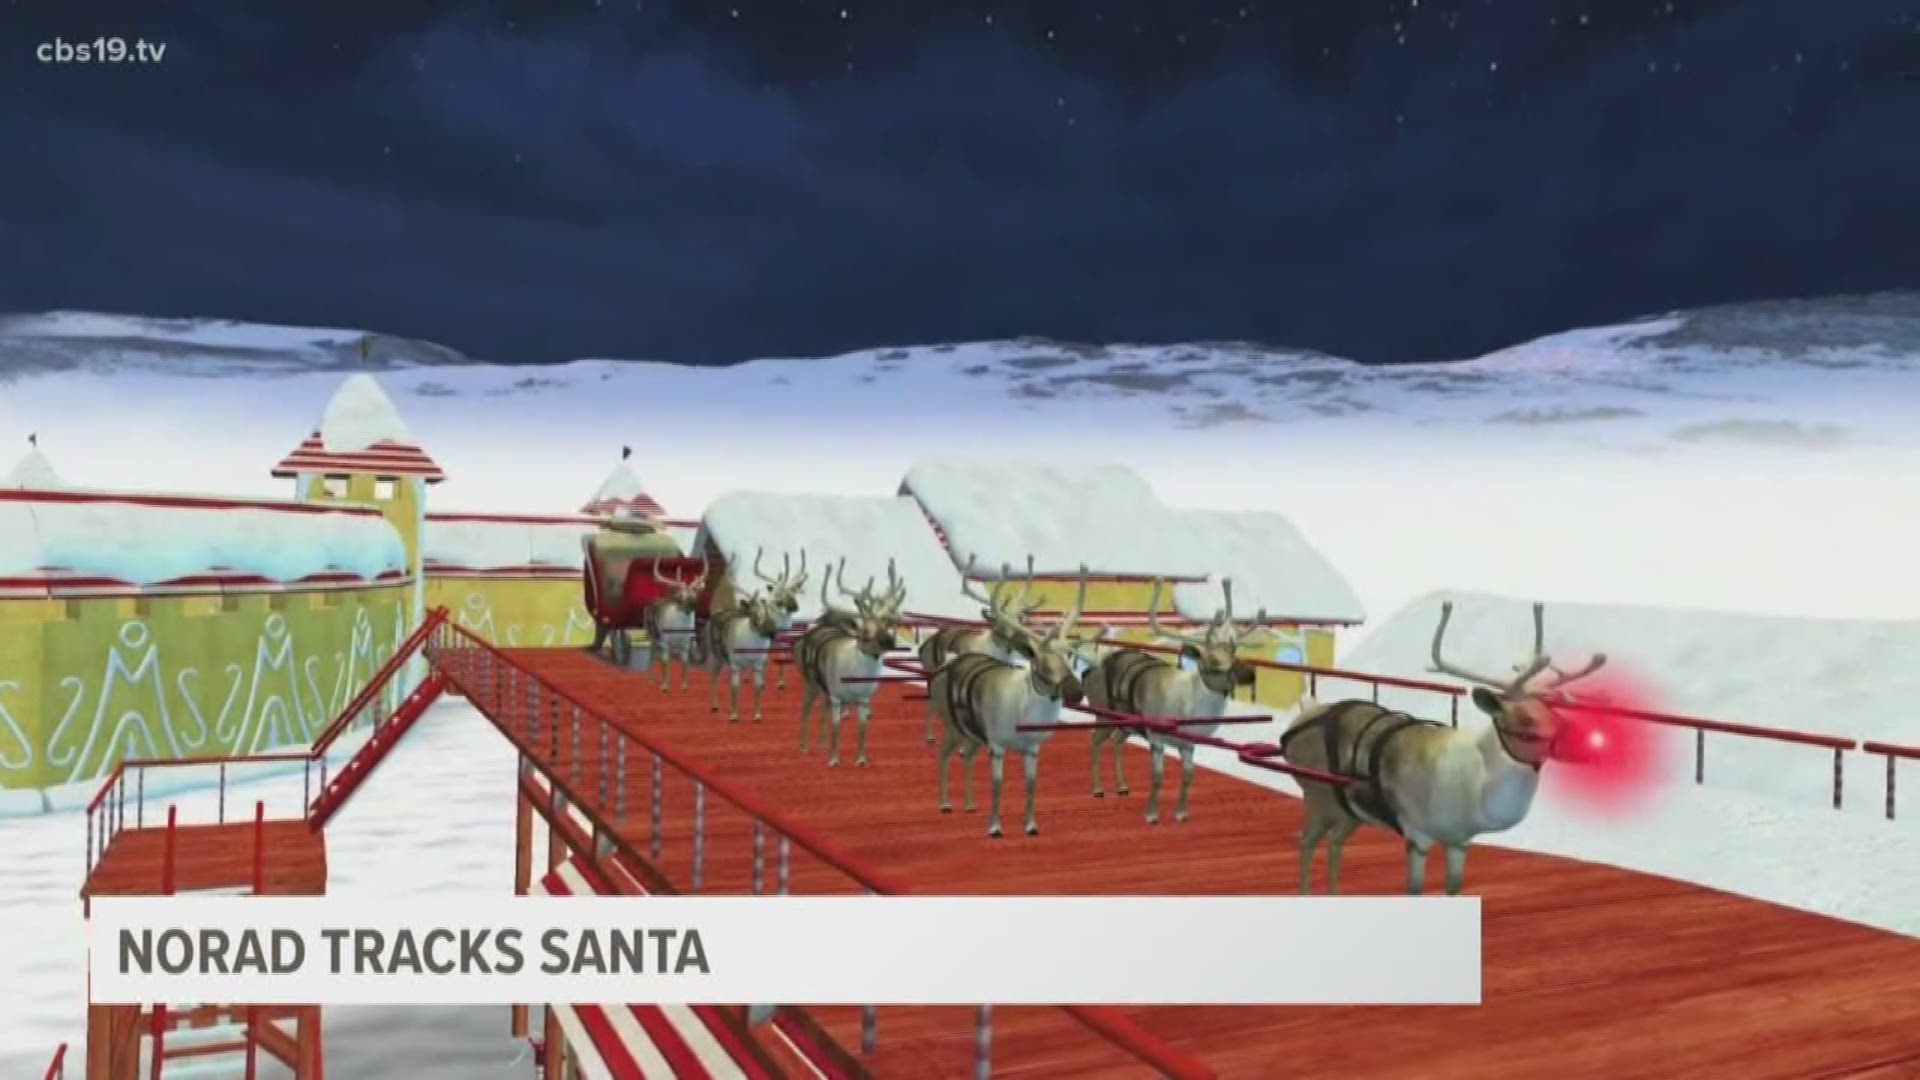 Meteorologist Michael Behrens had the chance to talk to Preston Schlachter of NORAD, who told us how they use radar and satellite to keep an eye on Santa each year!